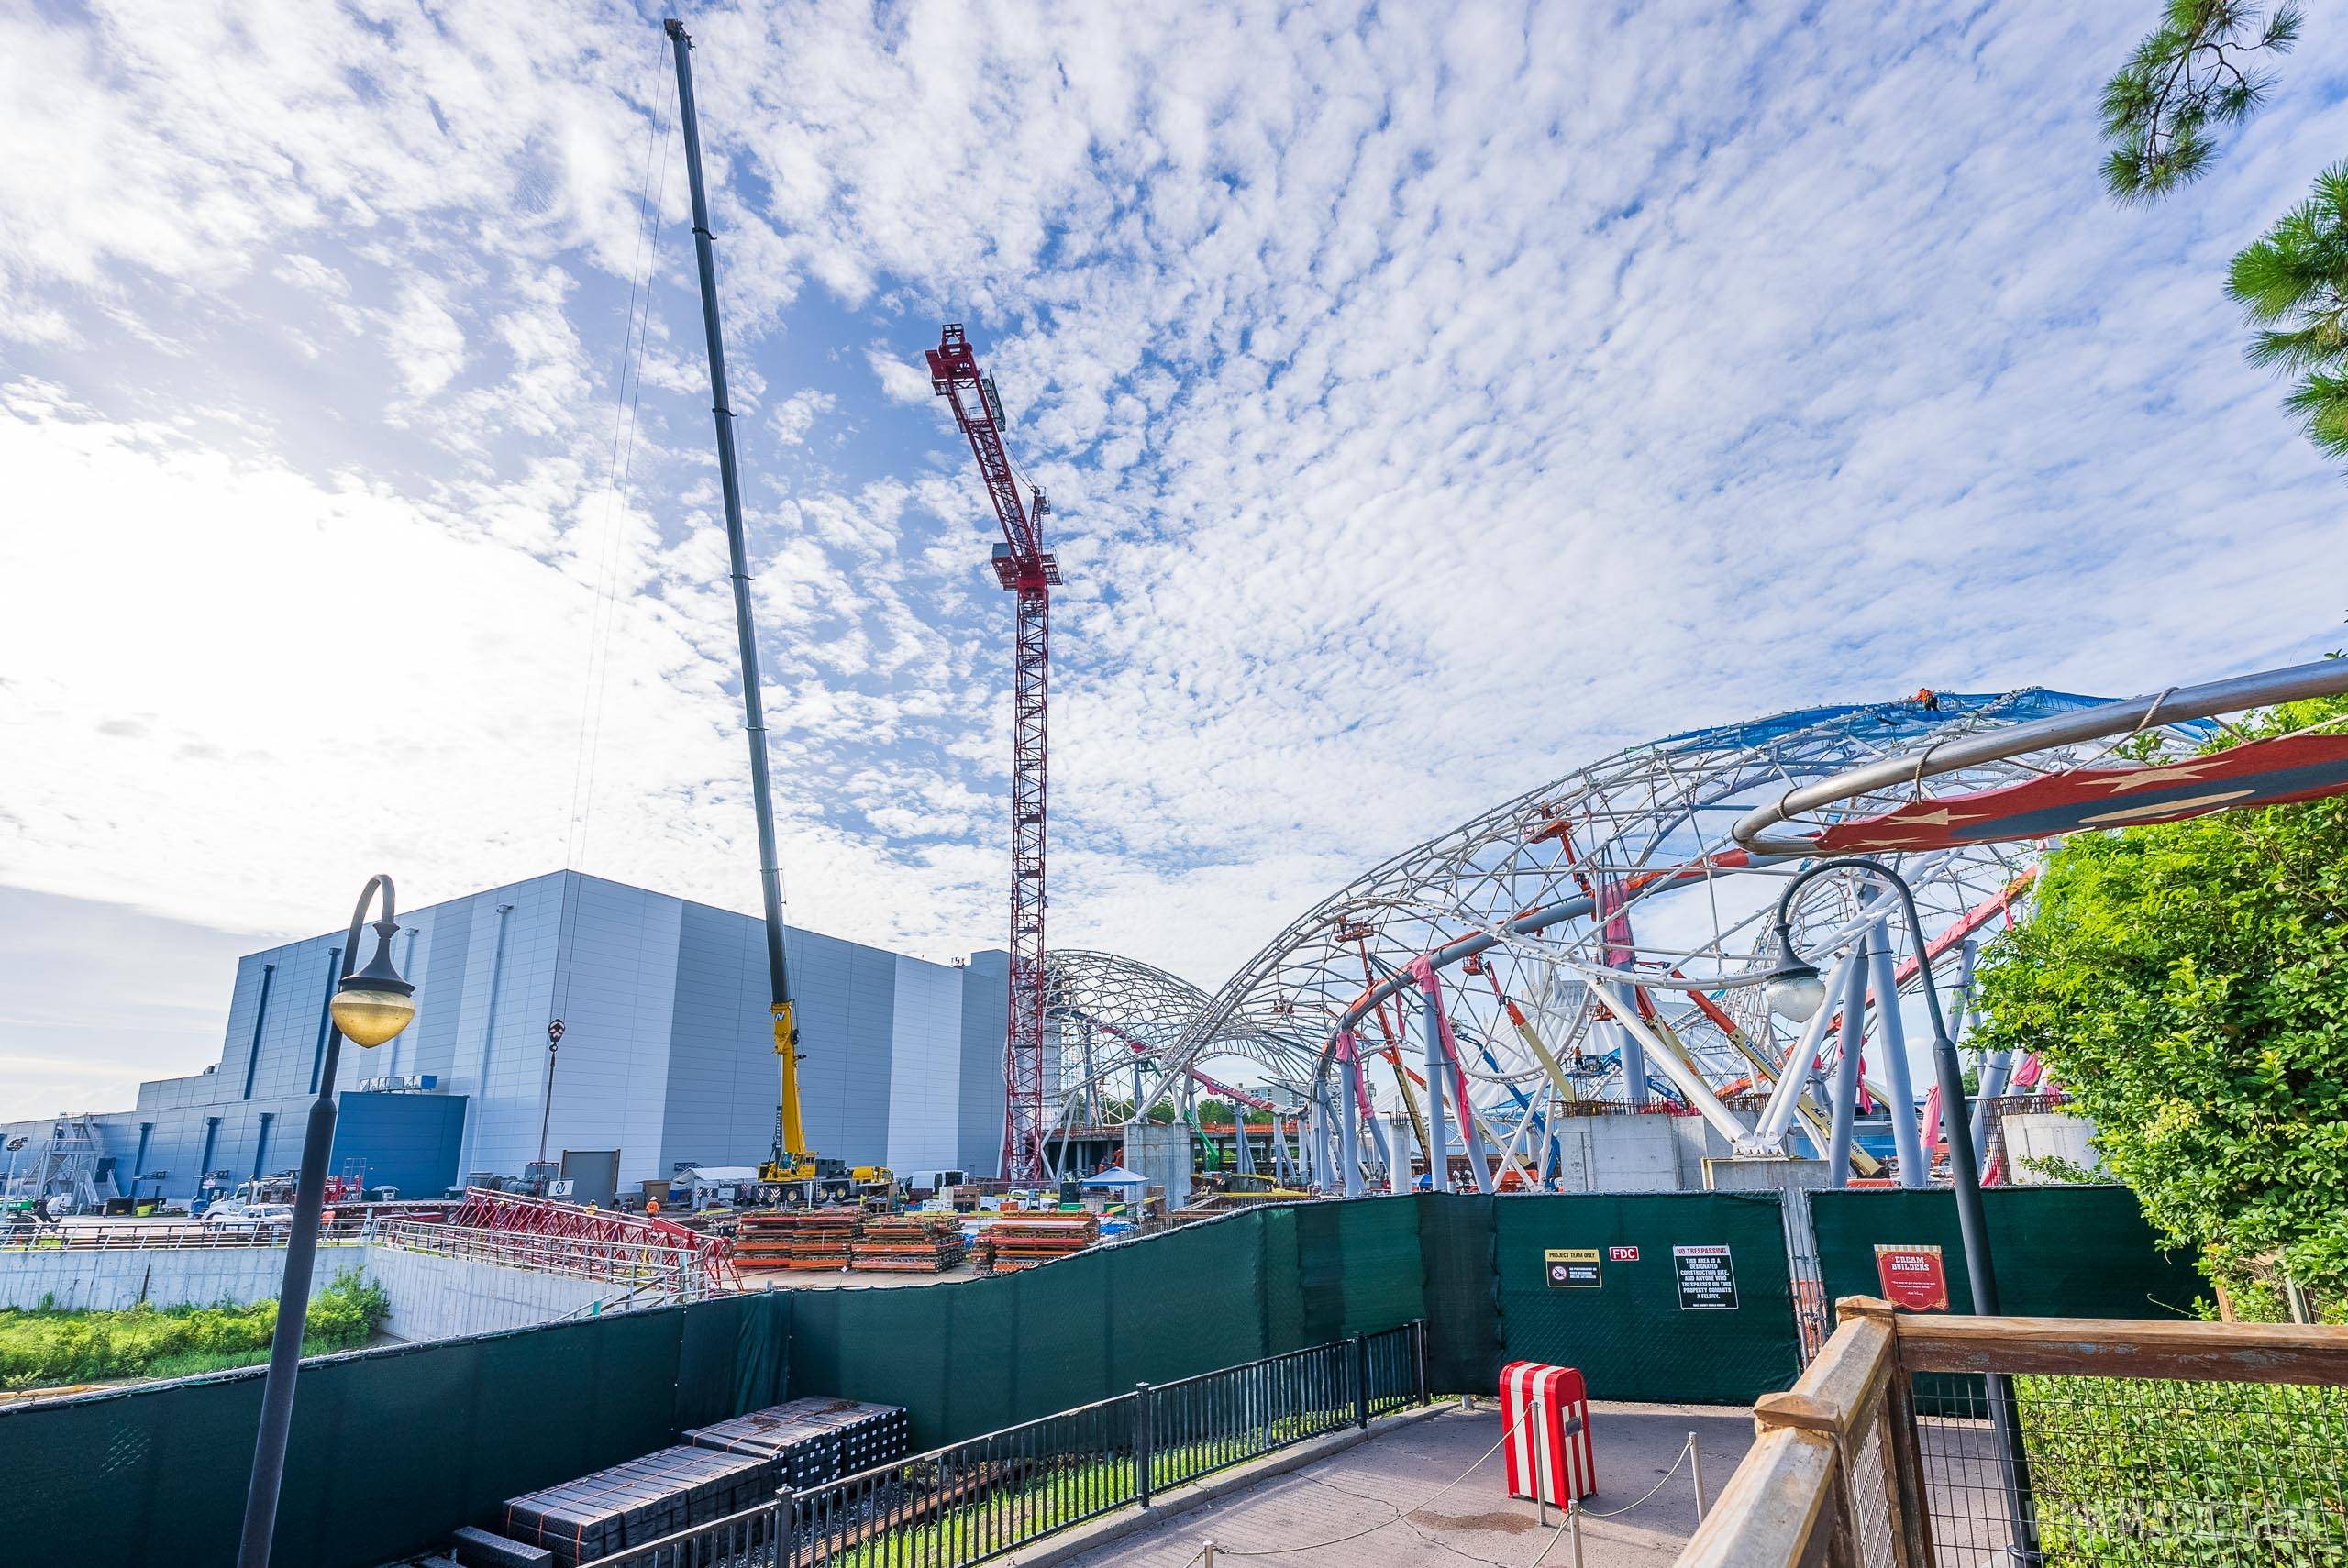 Tower crane removal gets underway at TRON Lightcycle Run in the Magic Kingdom